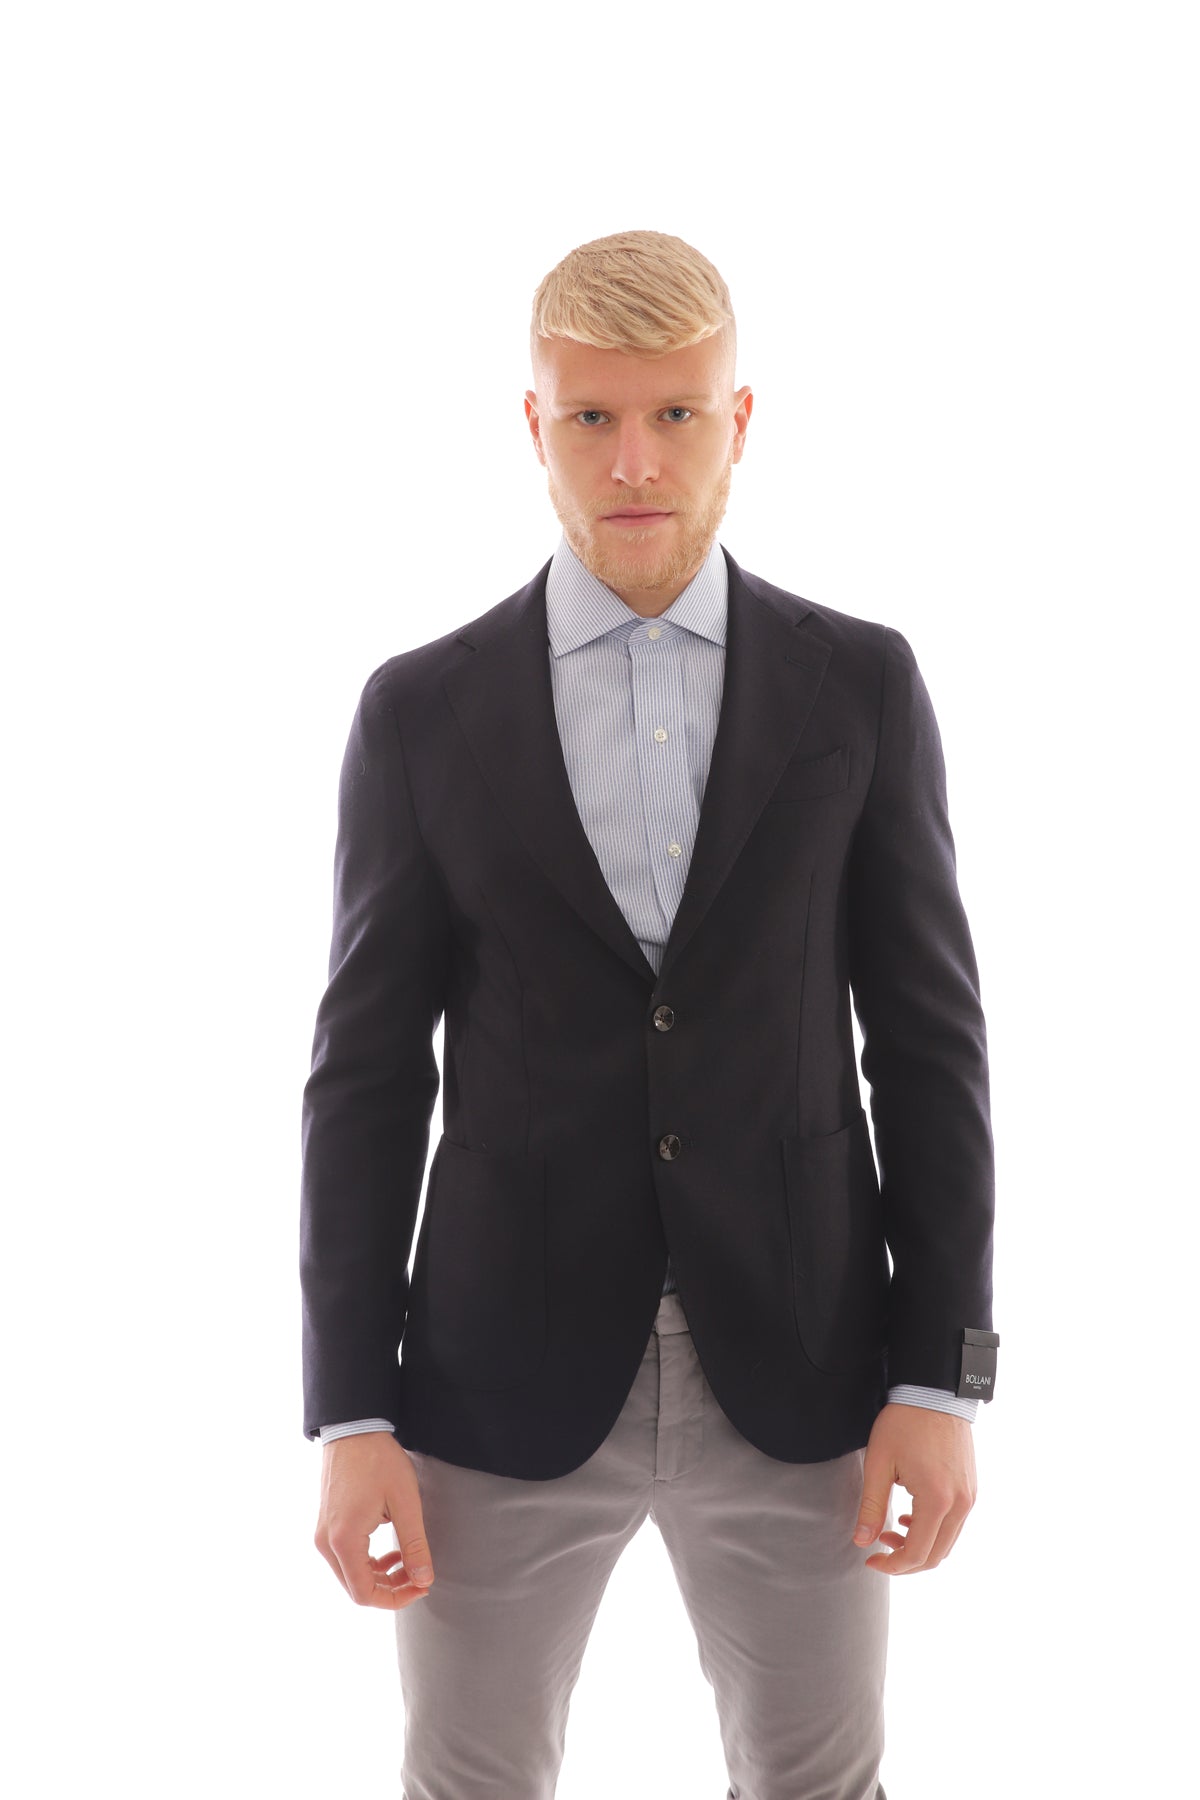 Classic men's jacket in solid color